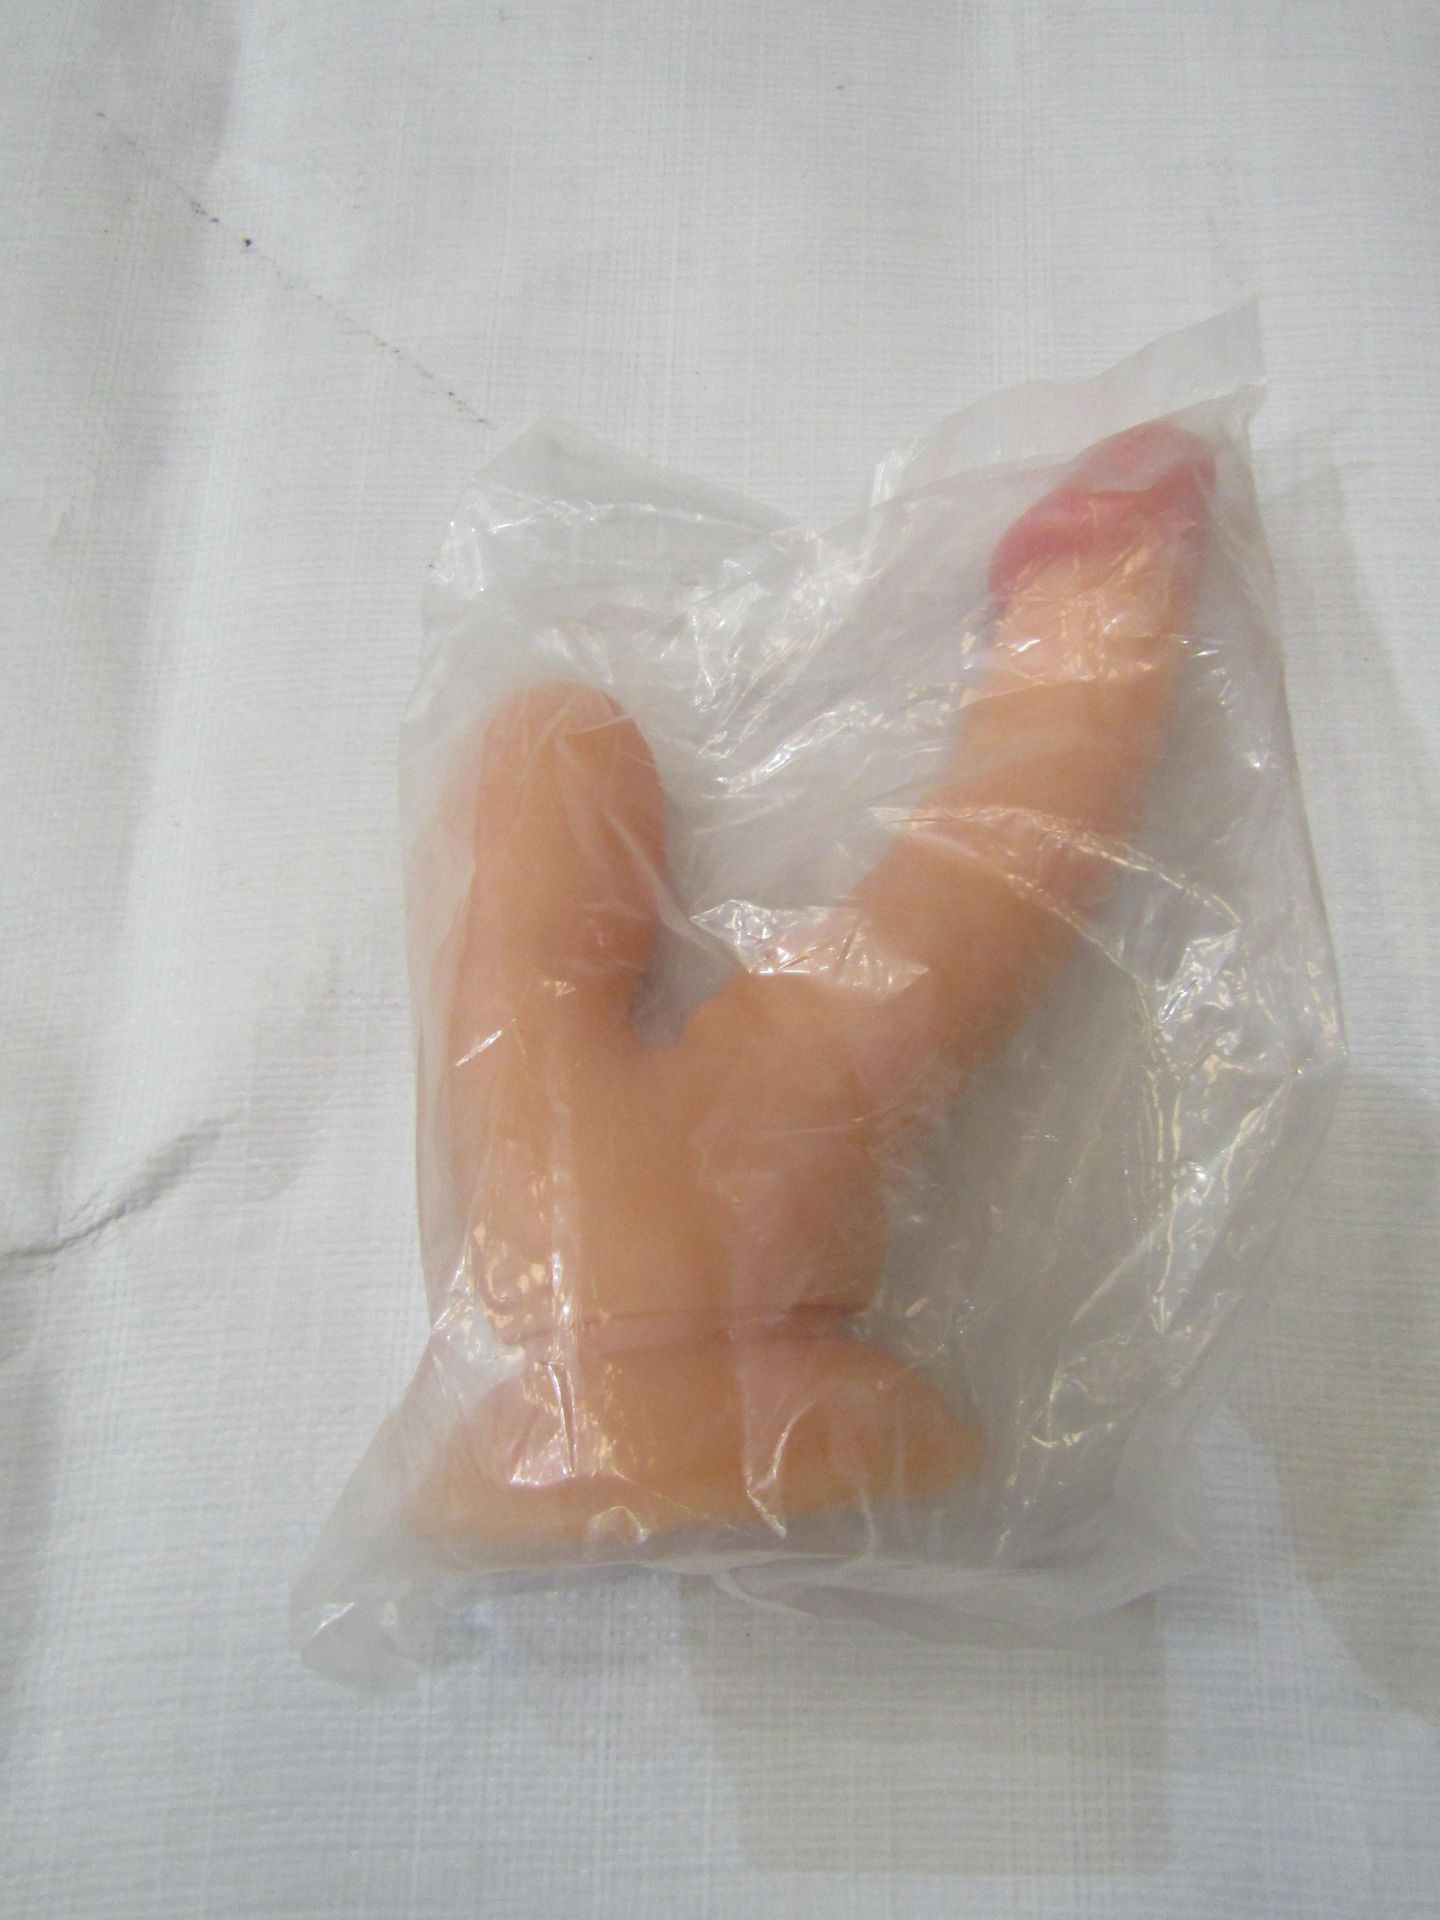 Dual Soft Silicone Dong With Anal Pleaser & Suction Cup - New & Packaged.